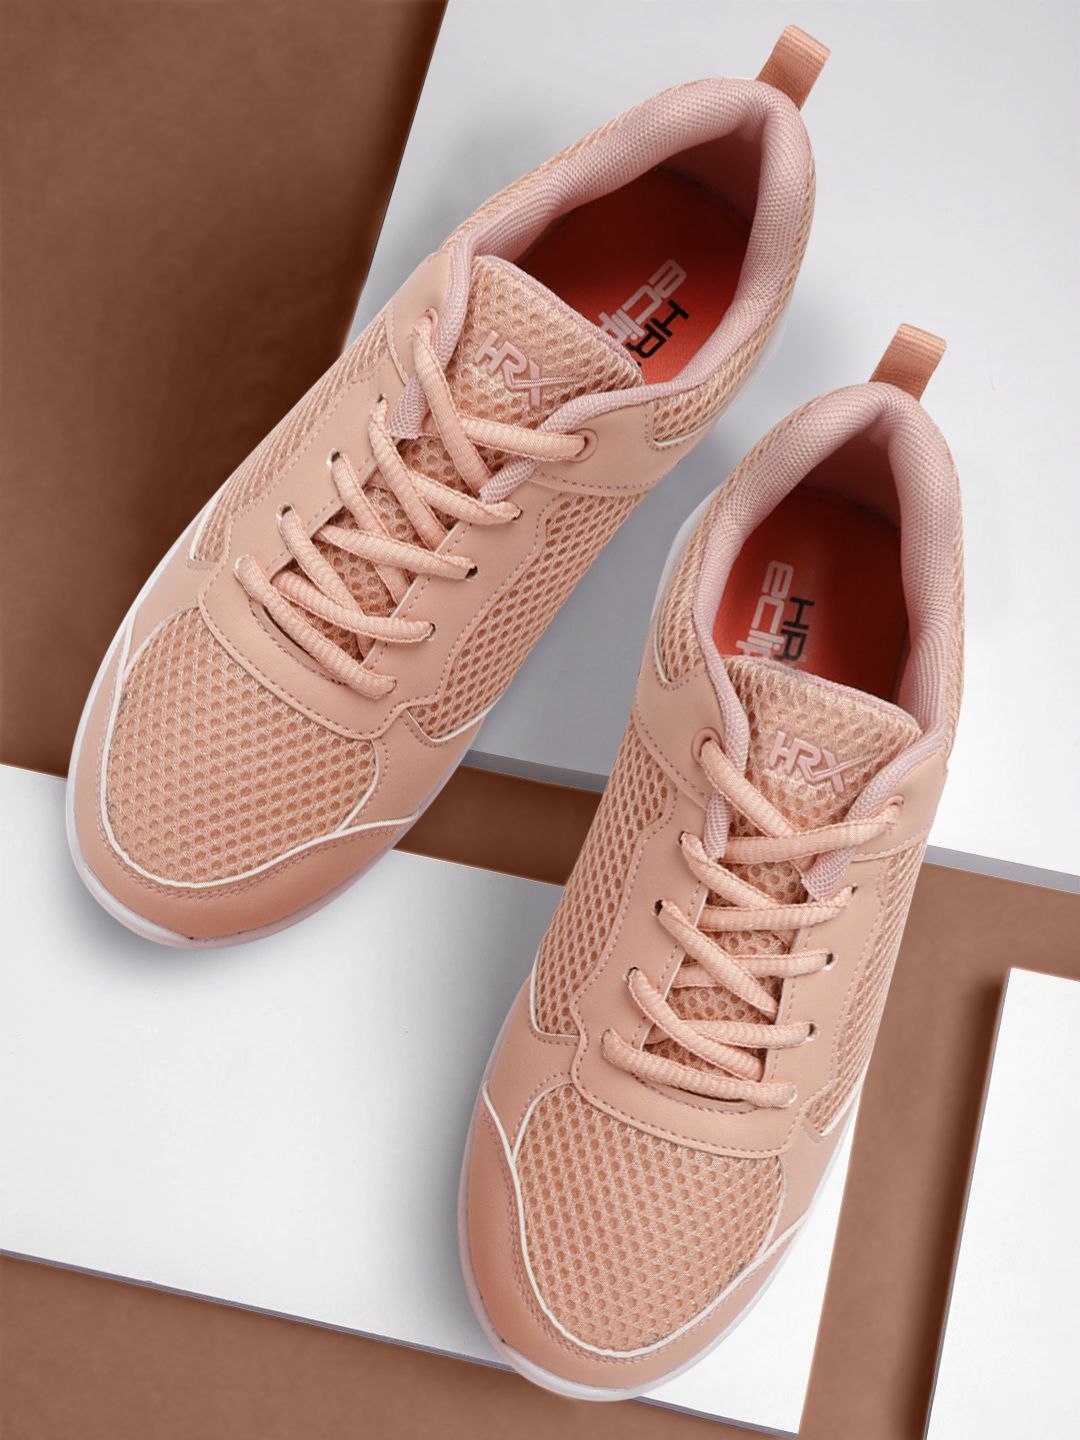 HRX by Hrithik Roshan Women Peach-Coloured Front Runner Shoes Price in India